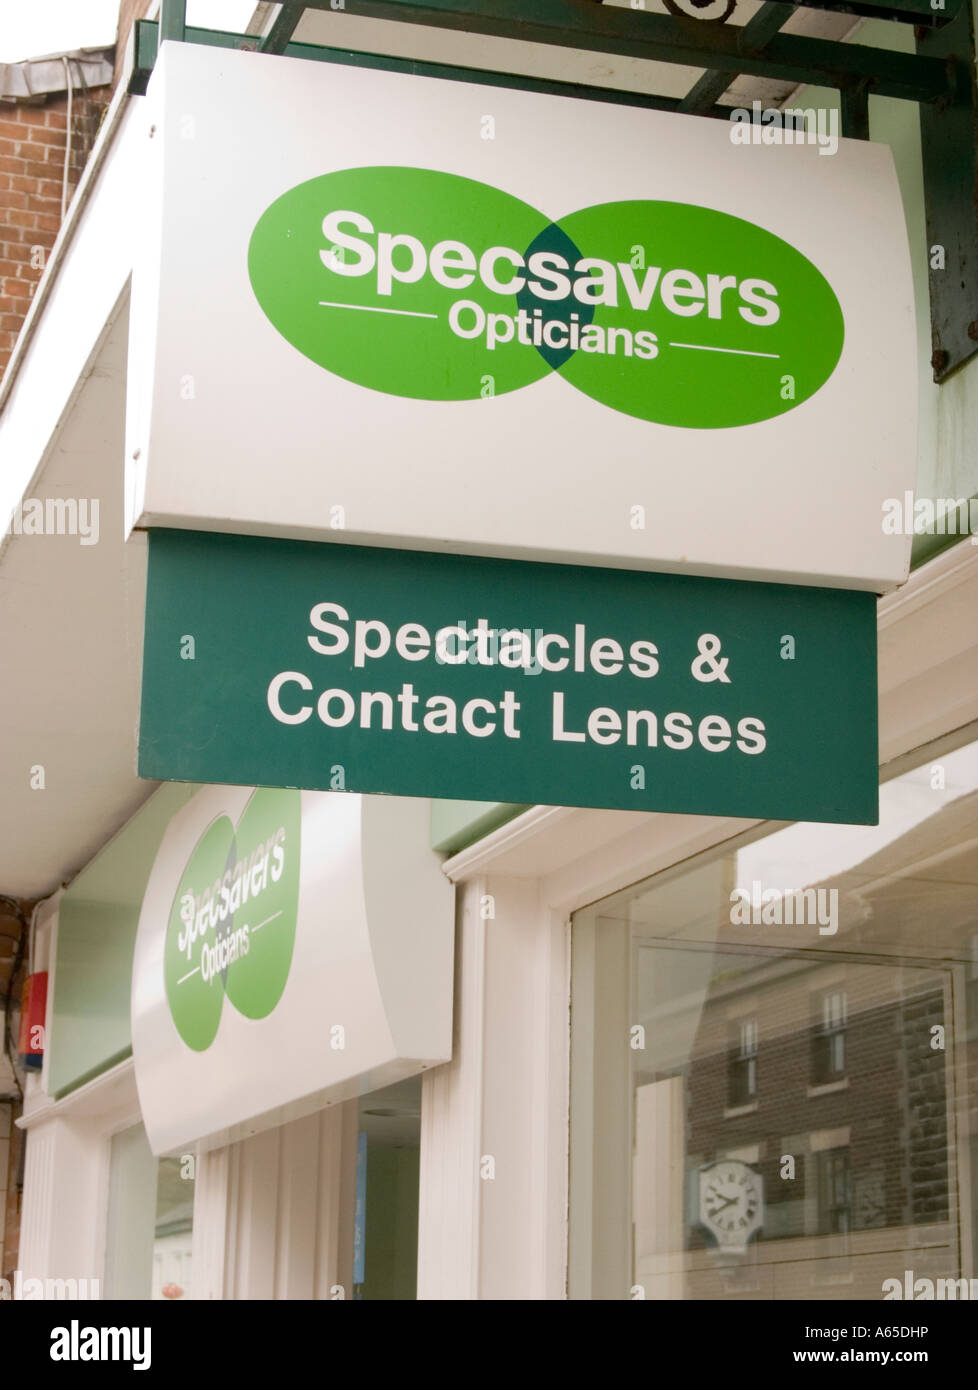 Specsavers spectacles and contact lenses shop exterior sign aberystwyth wales uk Stock Photo